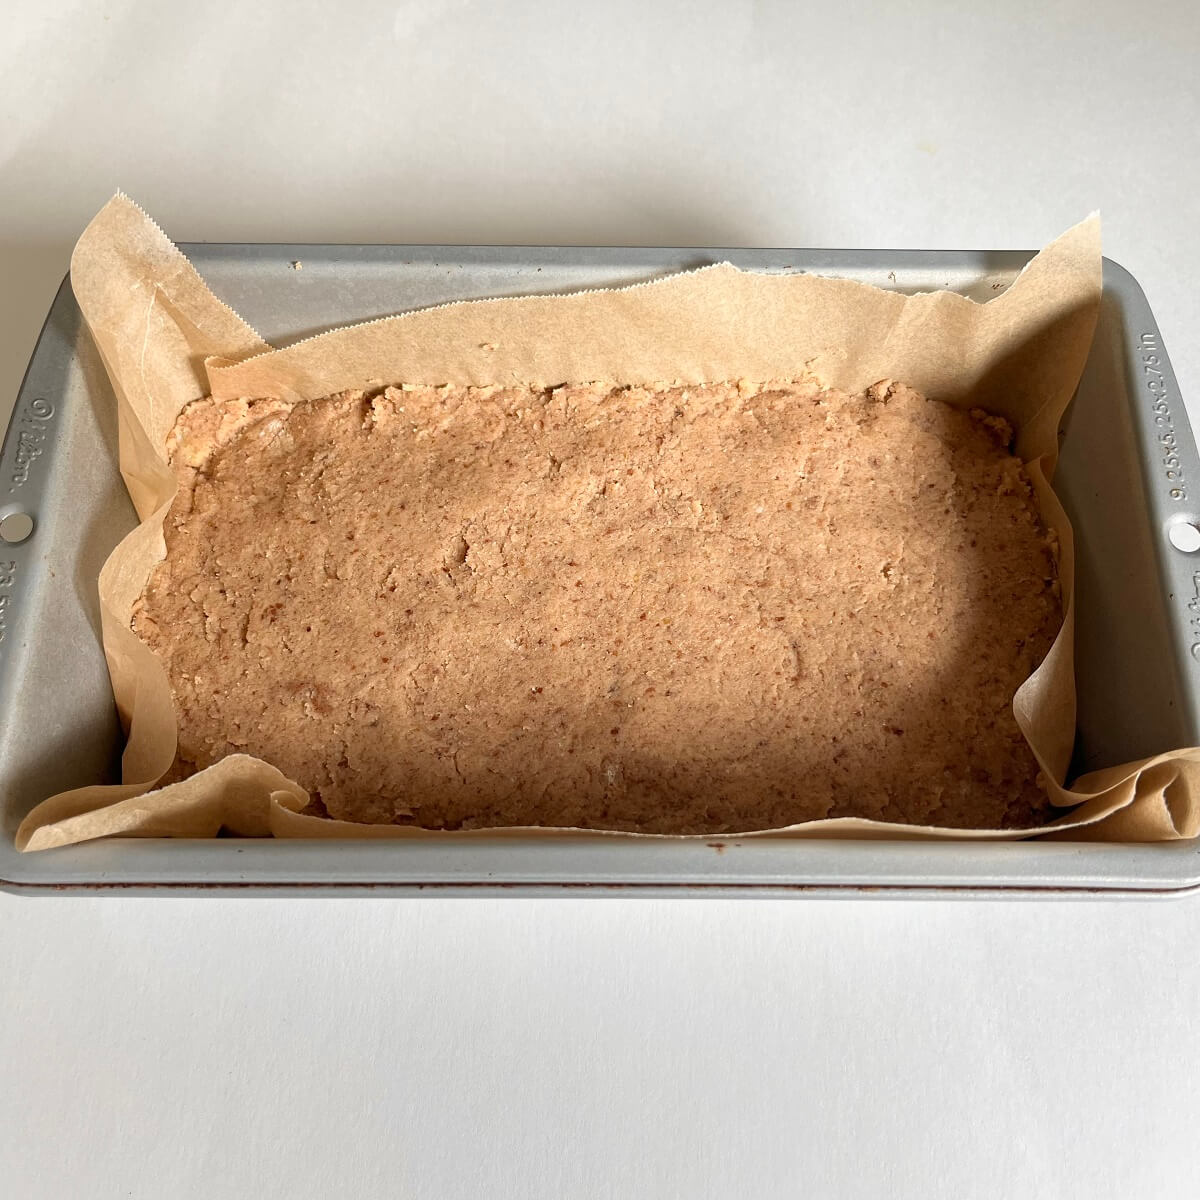 Raw paleo banana bread in a metal loaf pan lined with parchment paper.